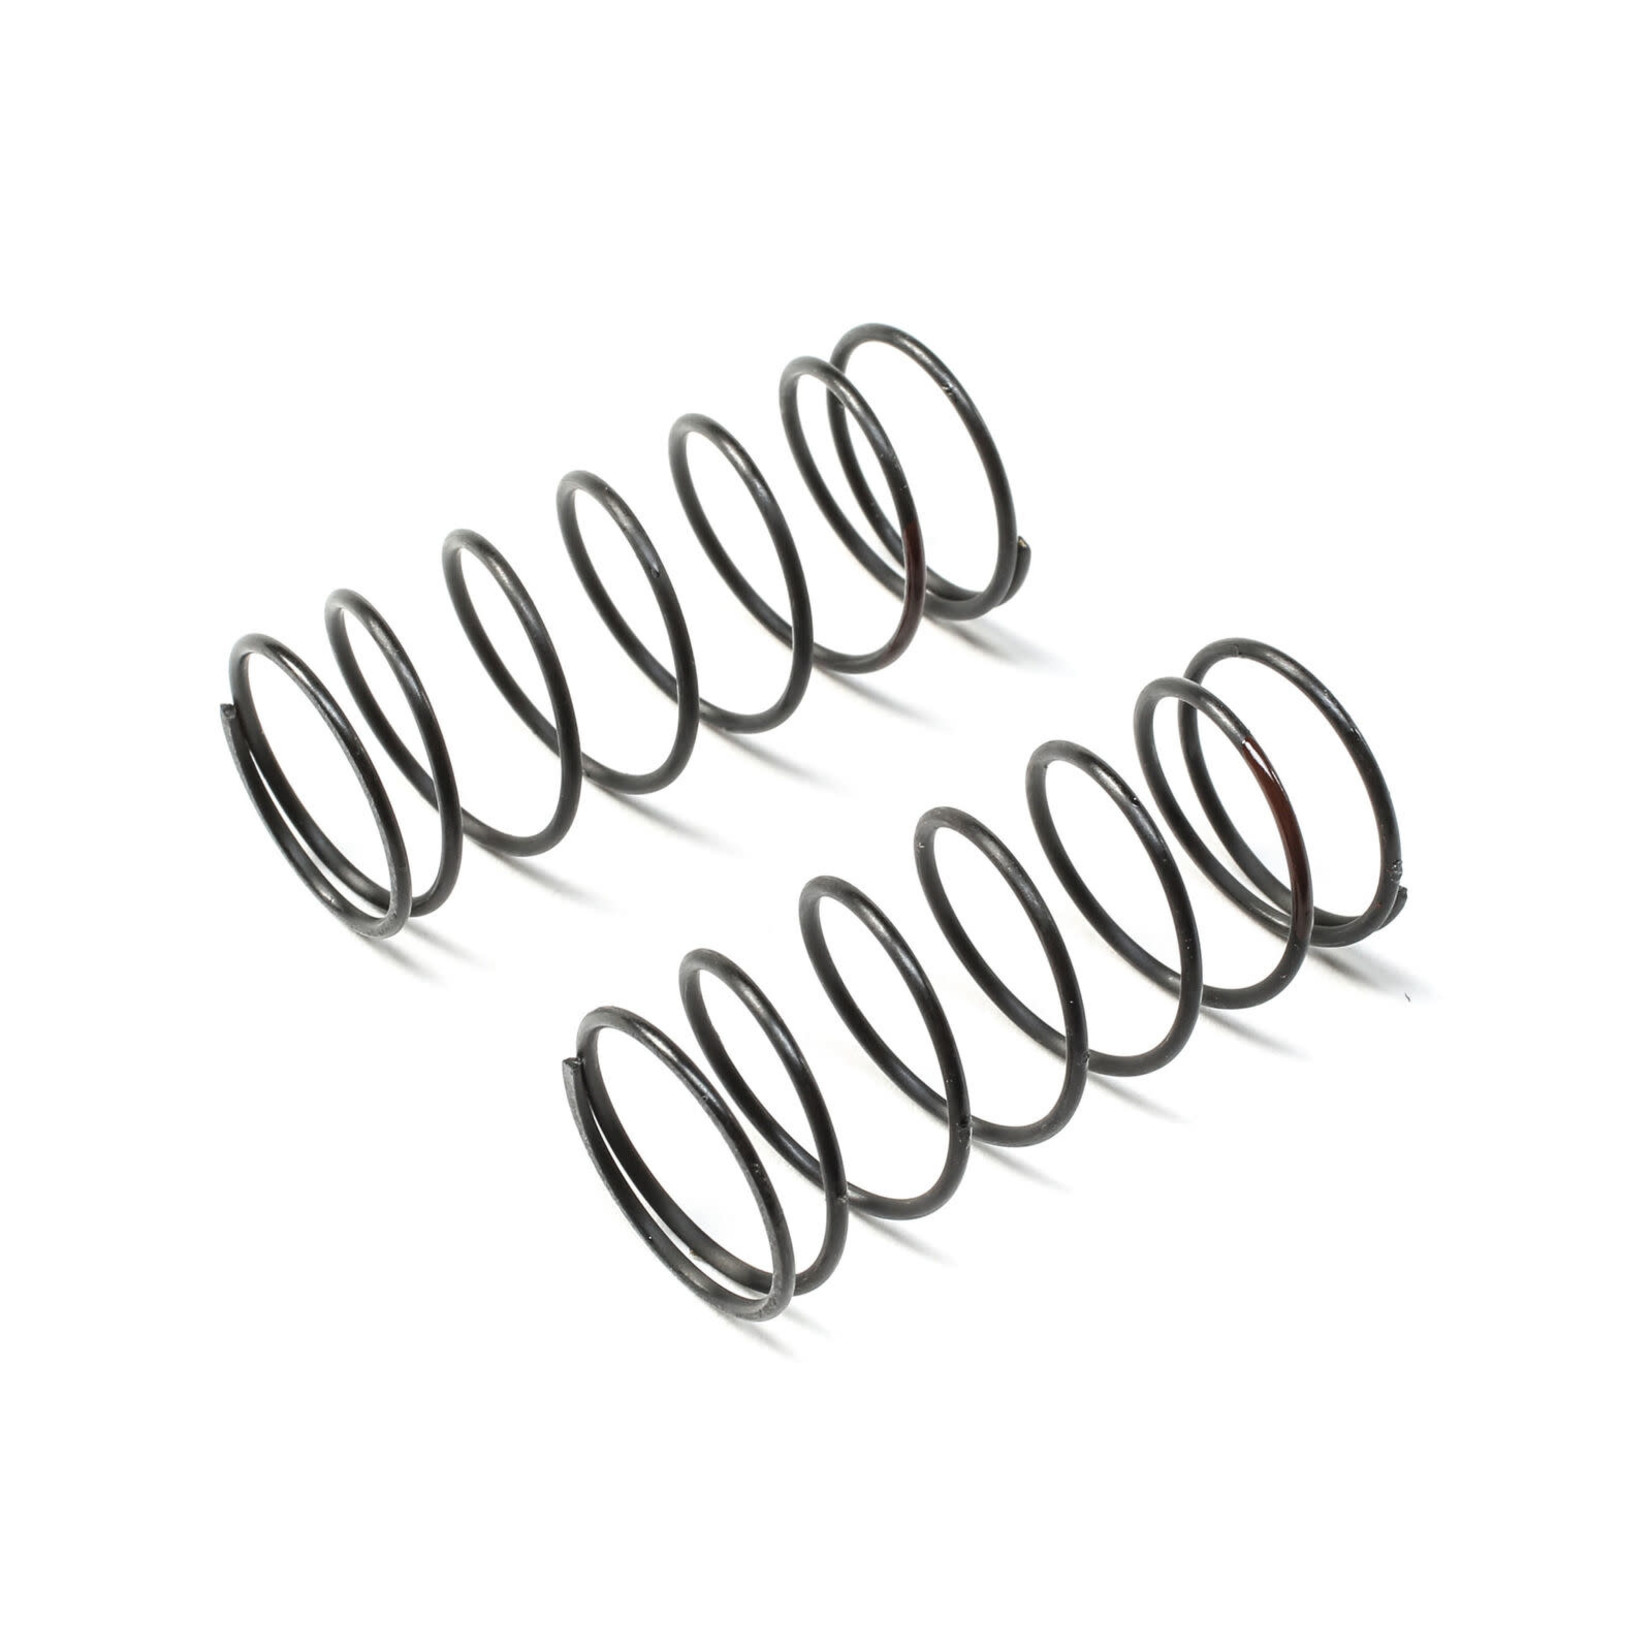 TLR TLR Front Springs, Brown, Low Frequency 12mm (2)